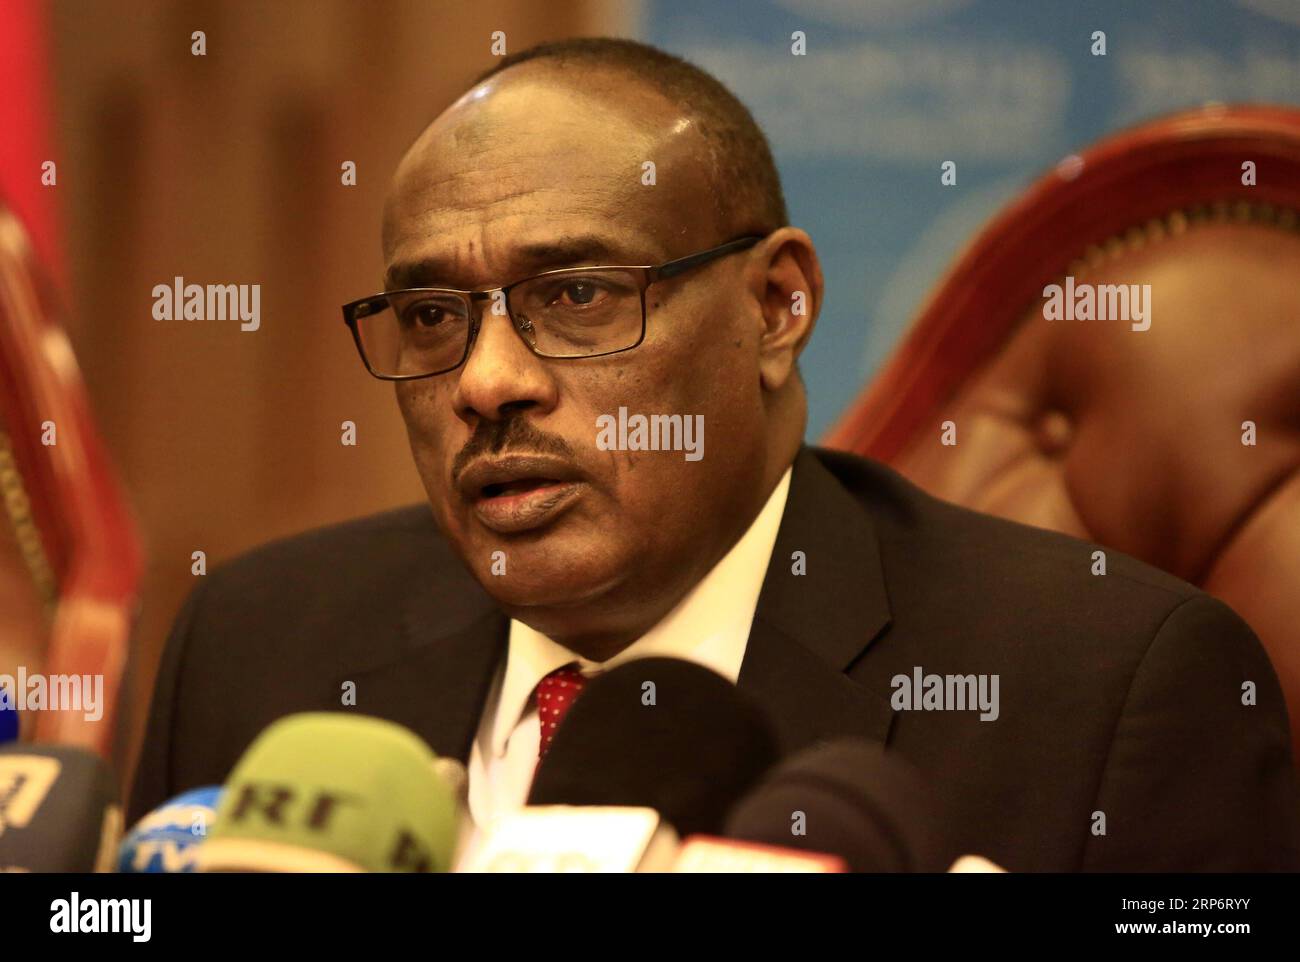 (190119) -- KHARTOUM, Jan. 19, 2019 -- Sudanese Foreign Minister Al-Dirdiri Mohamed Ahmed speaks at a press conference in Khartoum, capital of Sudan, on Jan. 19, 2019. The Sudanese government on Saturday announced that another round of peace talks between the Central African Republic (CAR) government and 14 opposition factions will be held in Khartoum next week. ) SUDAN-KHARTOUM-FM-CENTRAL AFRICAN REPUBLIC-PEACE TALKS-PRESS CONFERENCE MohamedxKhidir PUBLICATIONxNOTxINxCHN Stock Photo